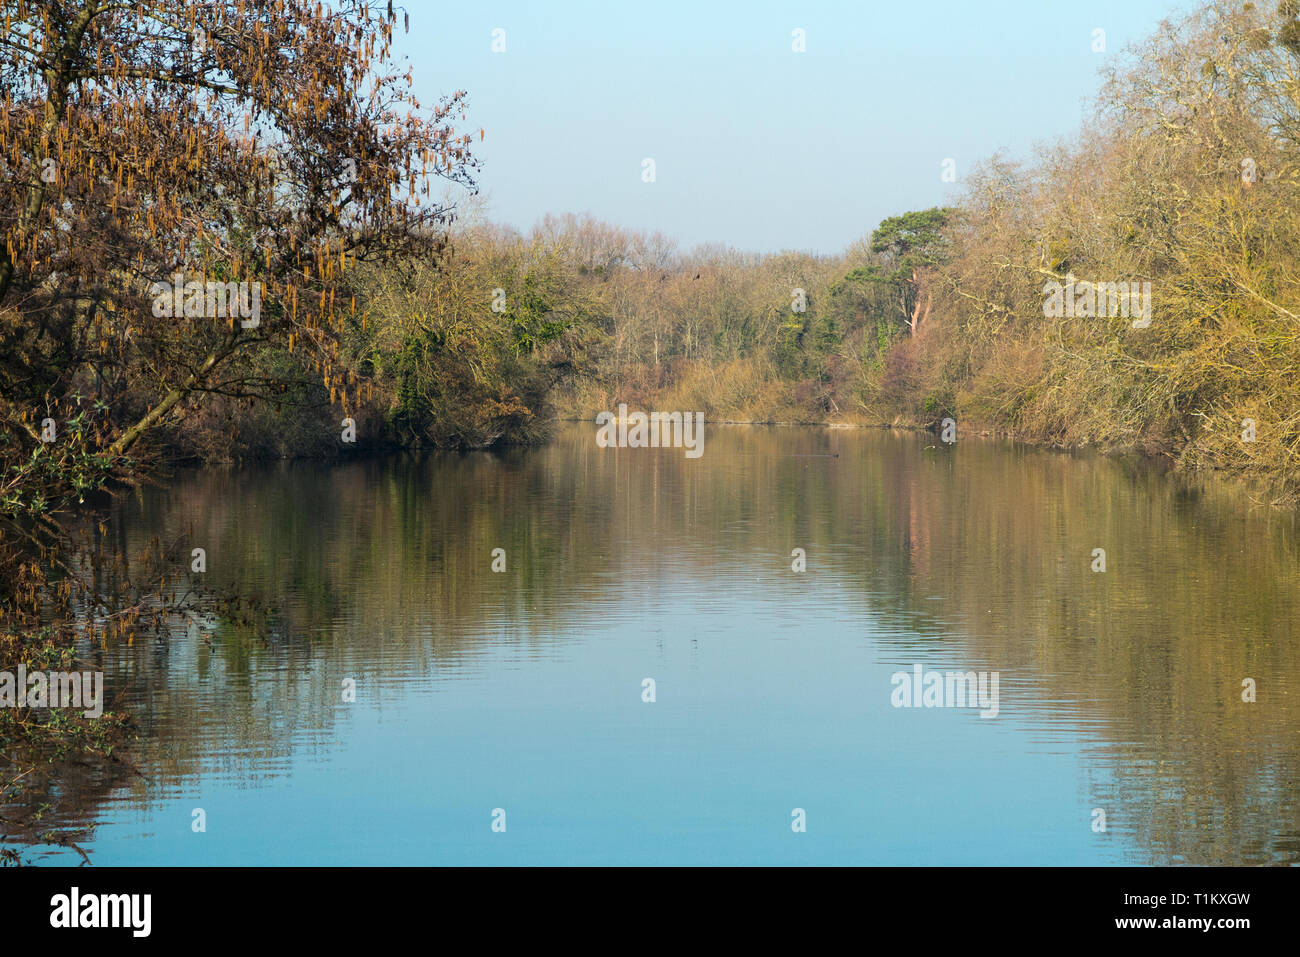 The River Thames and Runnymede meadow / flood plain on a bright winter day. Runnymede, Surrey. UK. (106) Stock Photo